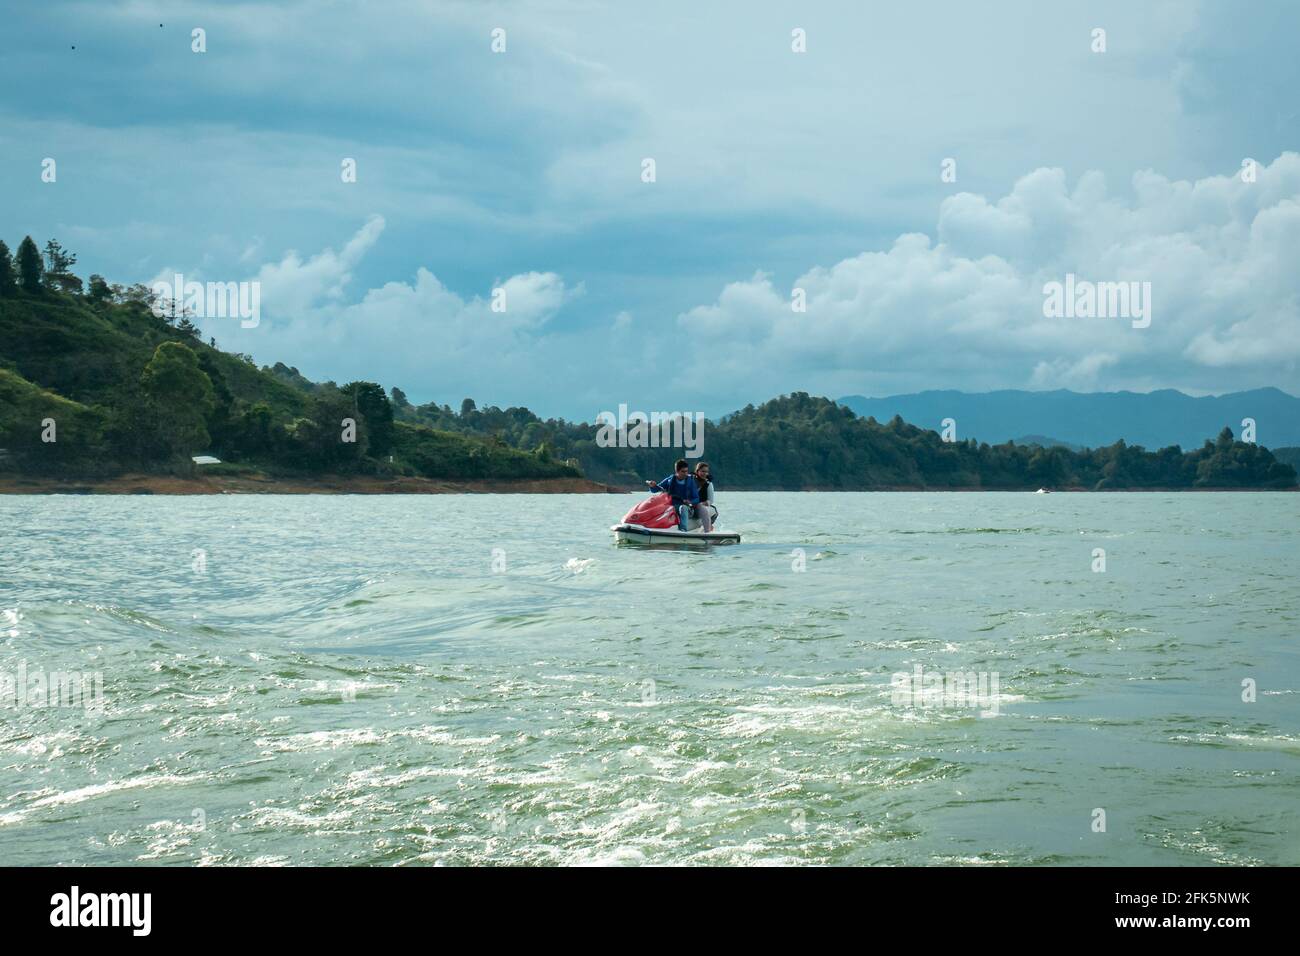 Guatapé, Antioquia, Colombia - April 3 2021: Latin Couple Driving a Jetsky in the Waters of the Dam near Peñol Stock Photo